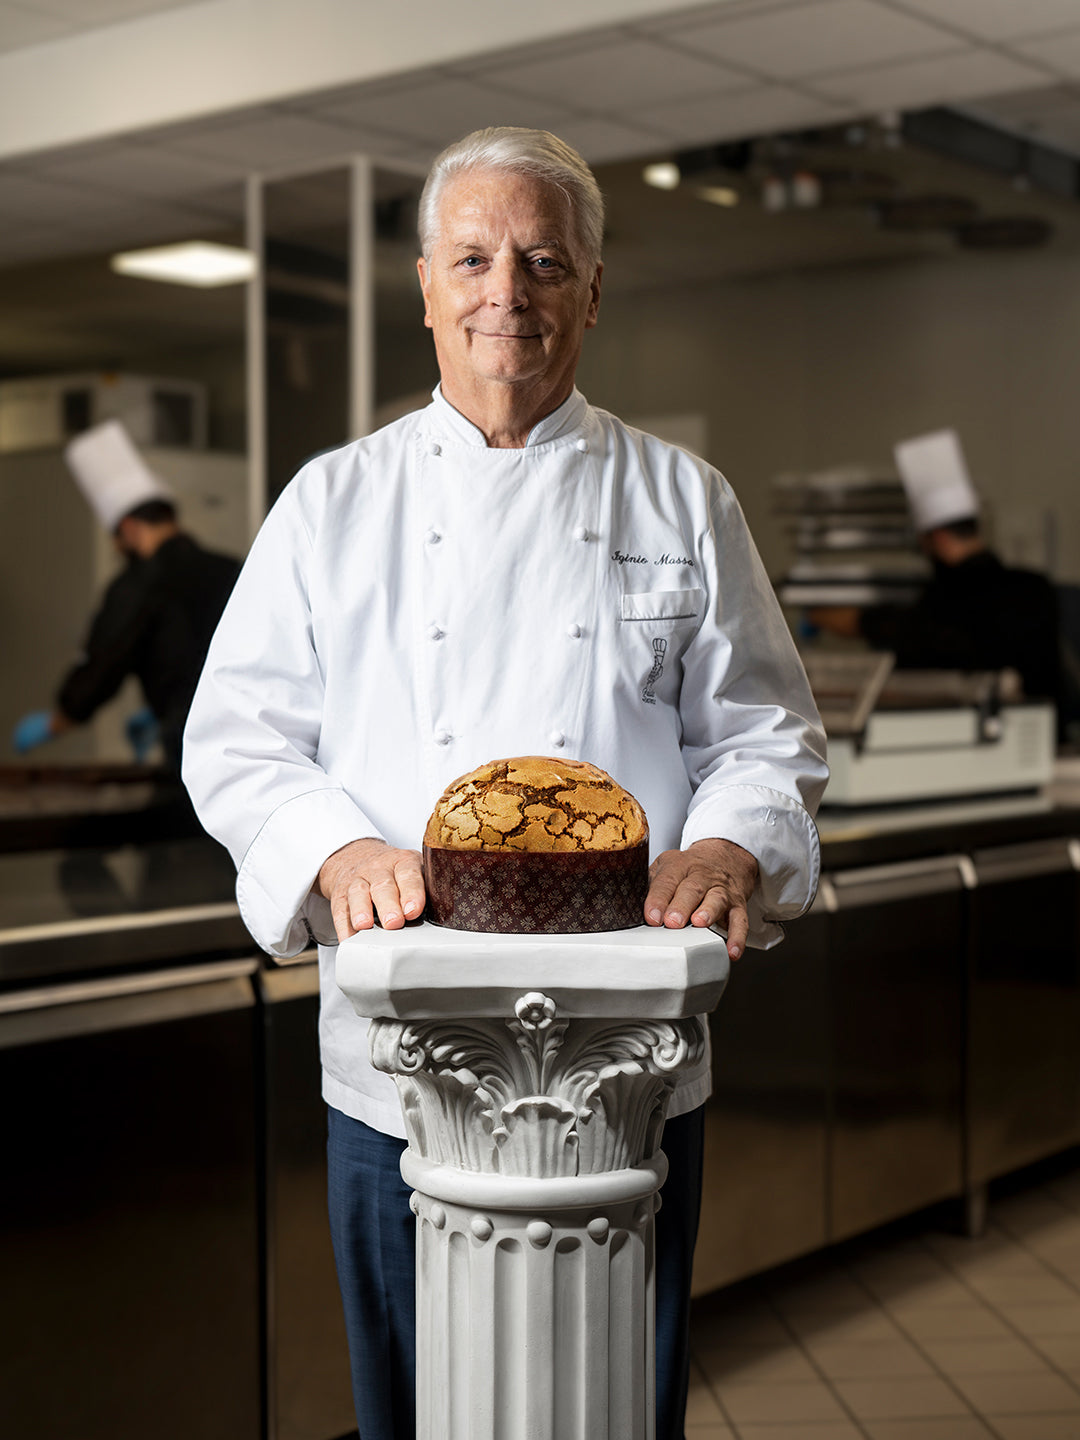 Panettone 50th Anniversary - Limited Edition